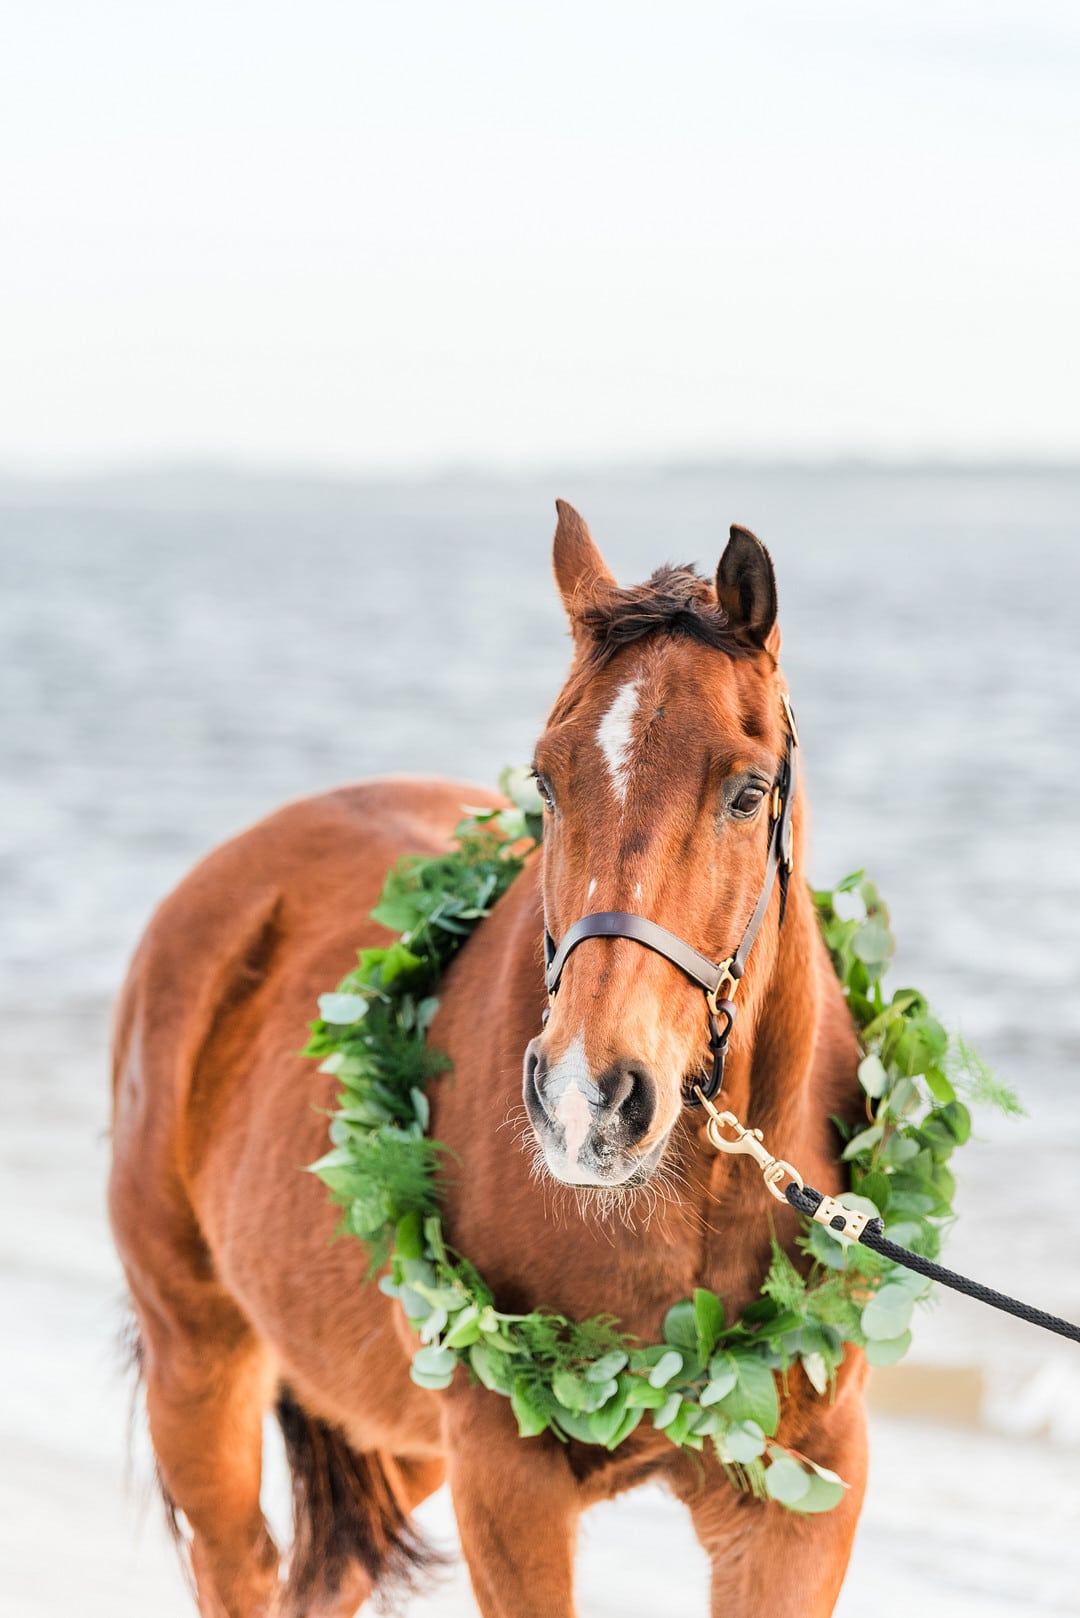 Romantic, Spring Styled Wedding with Horses on the Beach_Christine Austin Photography_©christineaustinphotography_2021_RomanticBeachStyledShoot_Horses_66_low